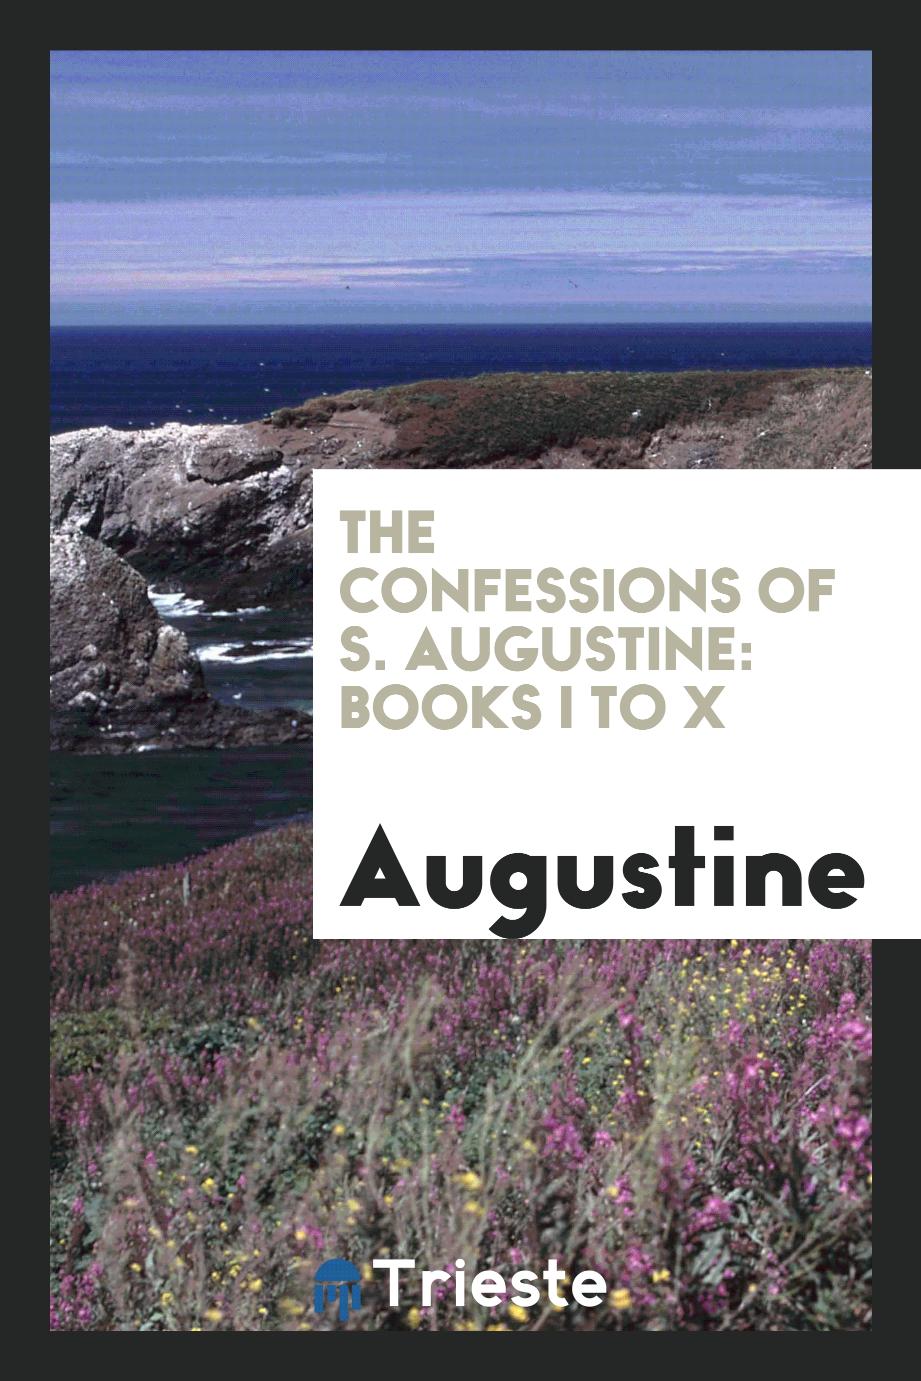 The Confessions of S. Augustine: Books I to X